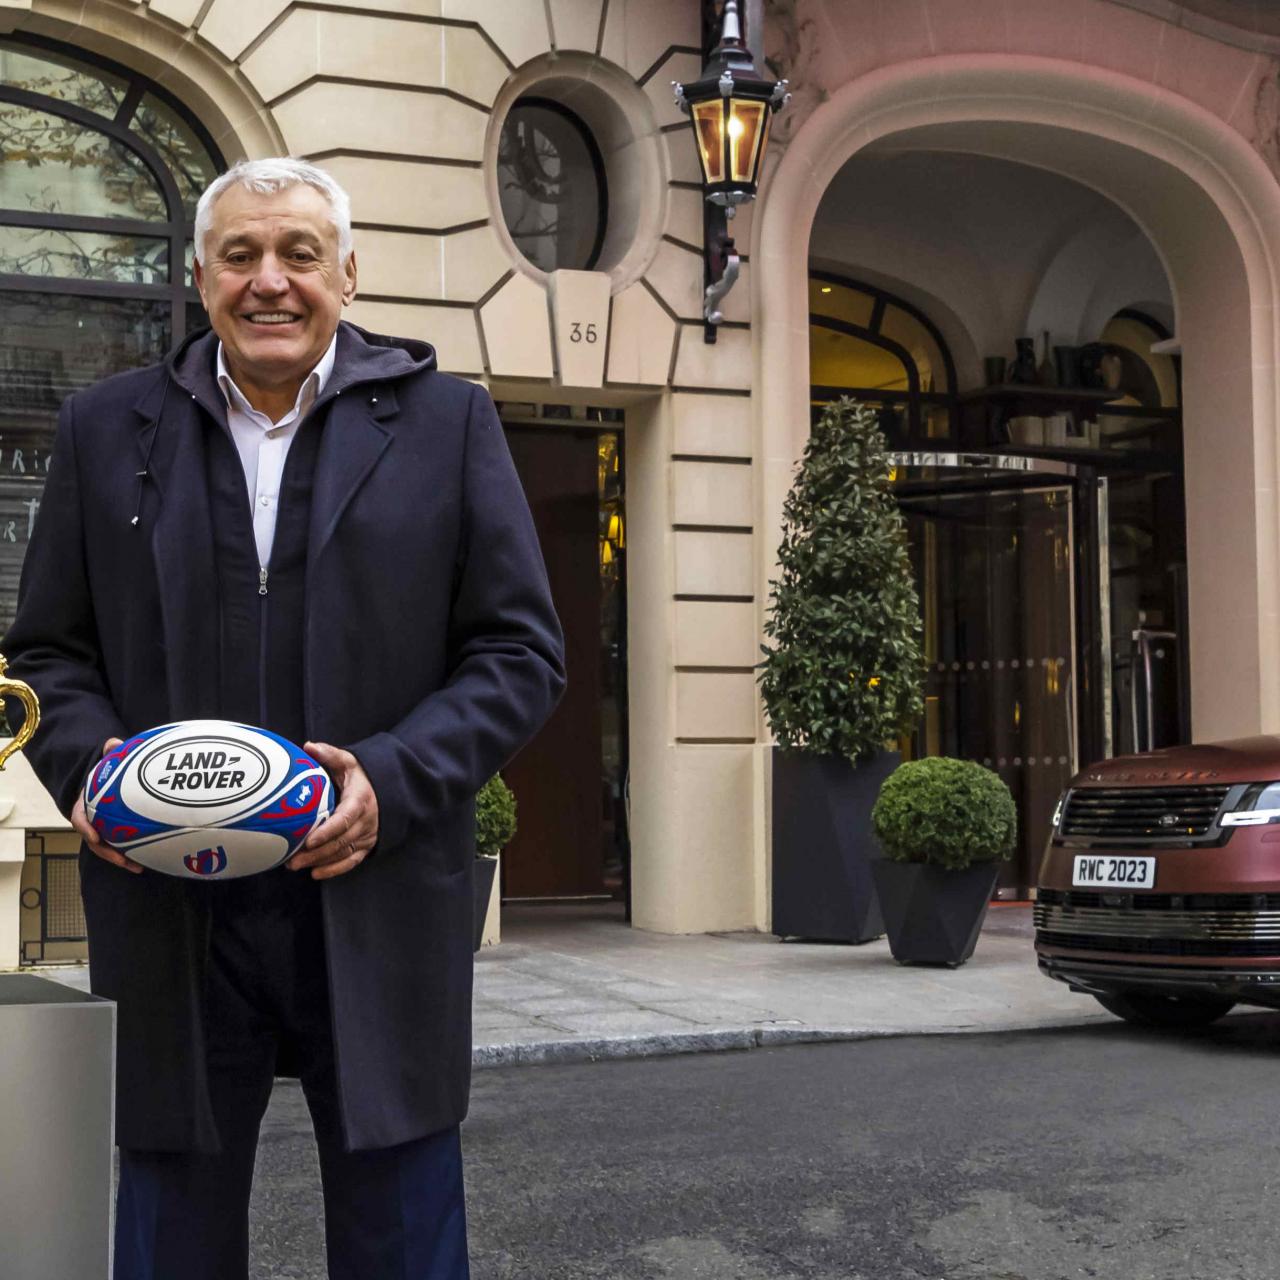 Land Rover and World Rugby go above and beyond for the Rugby World Cup 2023 